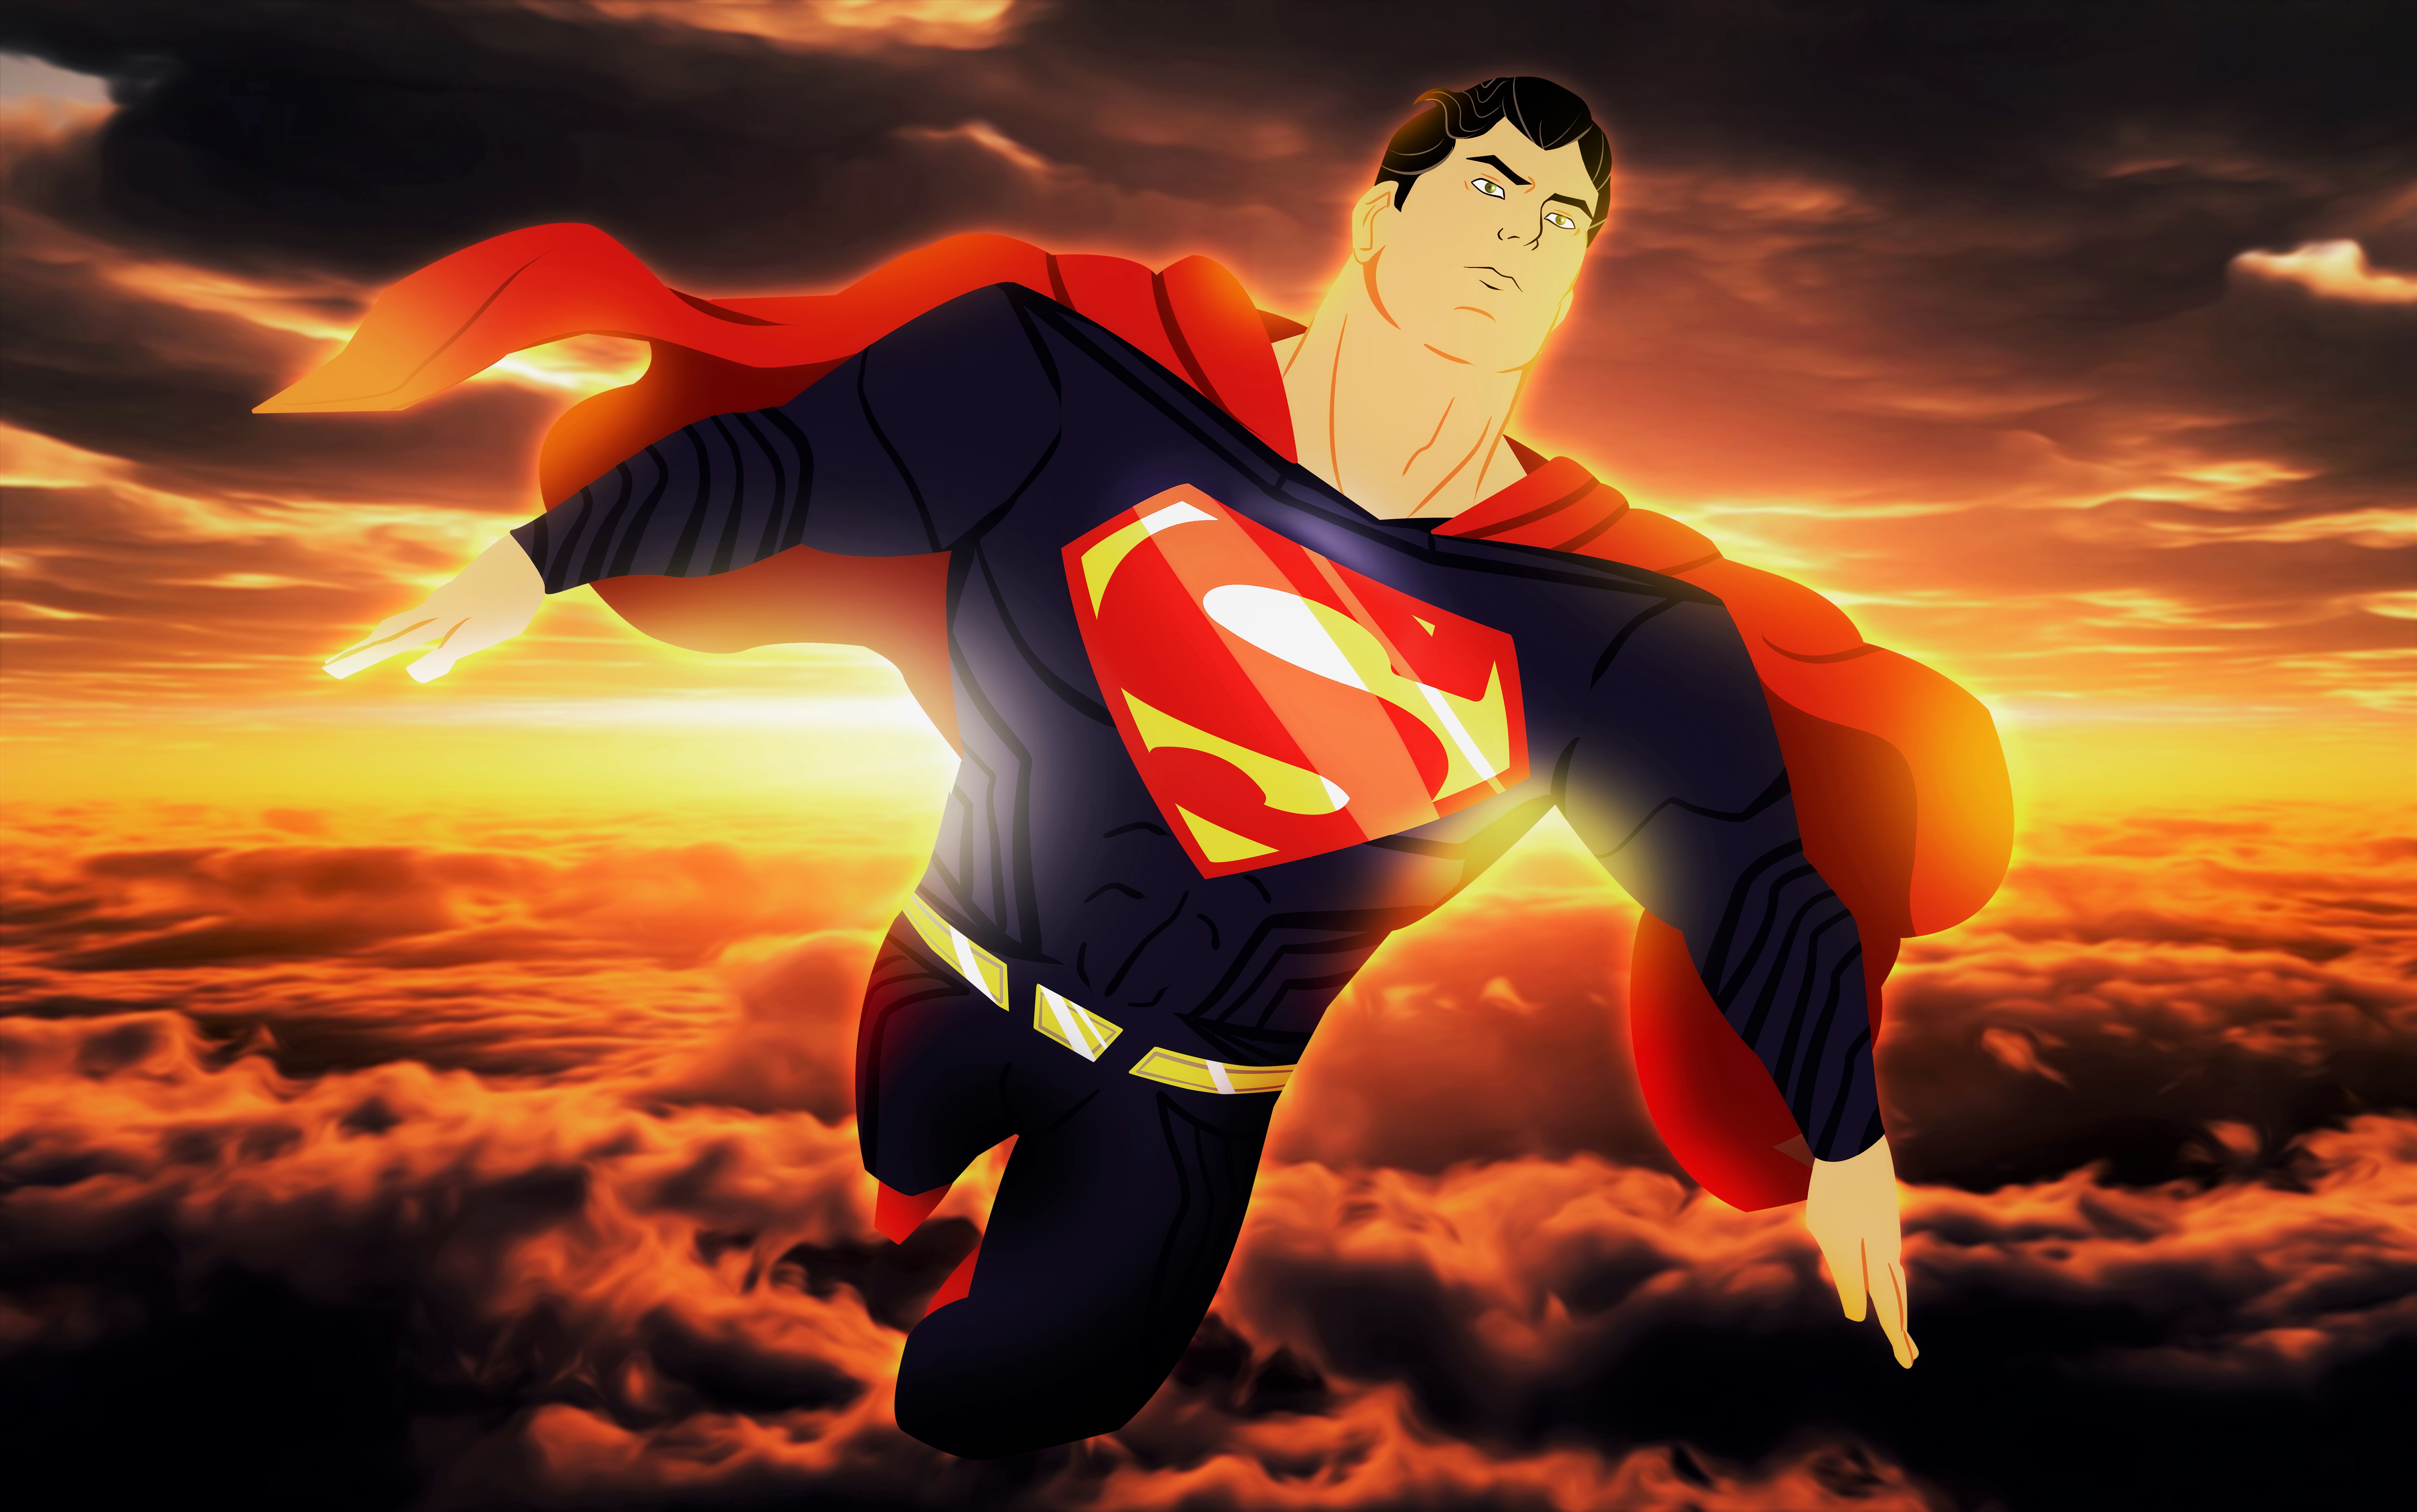 Super-man Justice League animated style by bat123spider on DeviantArt